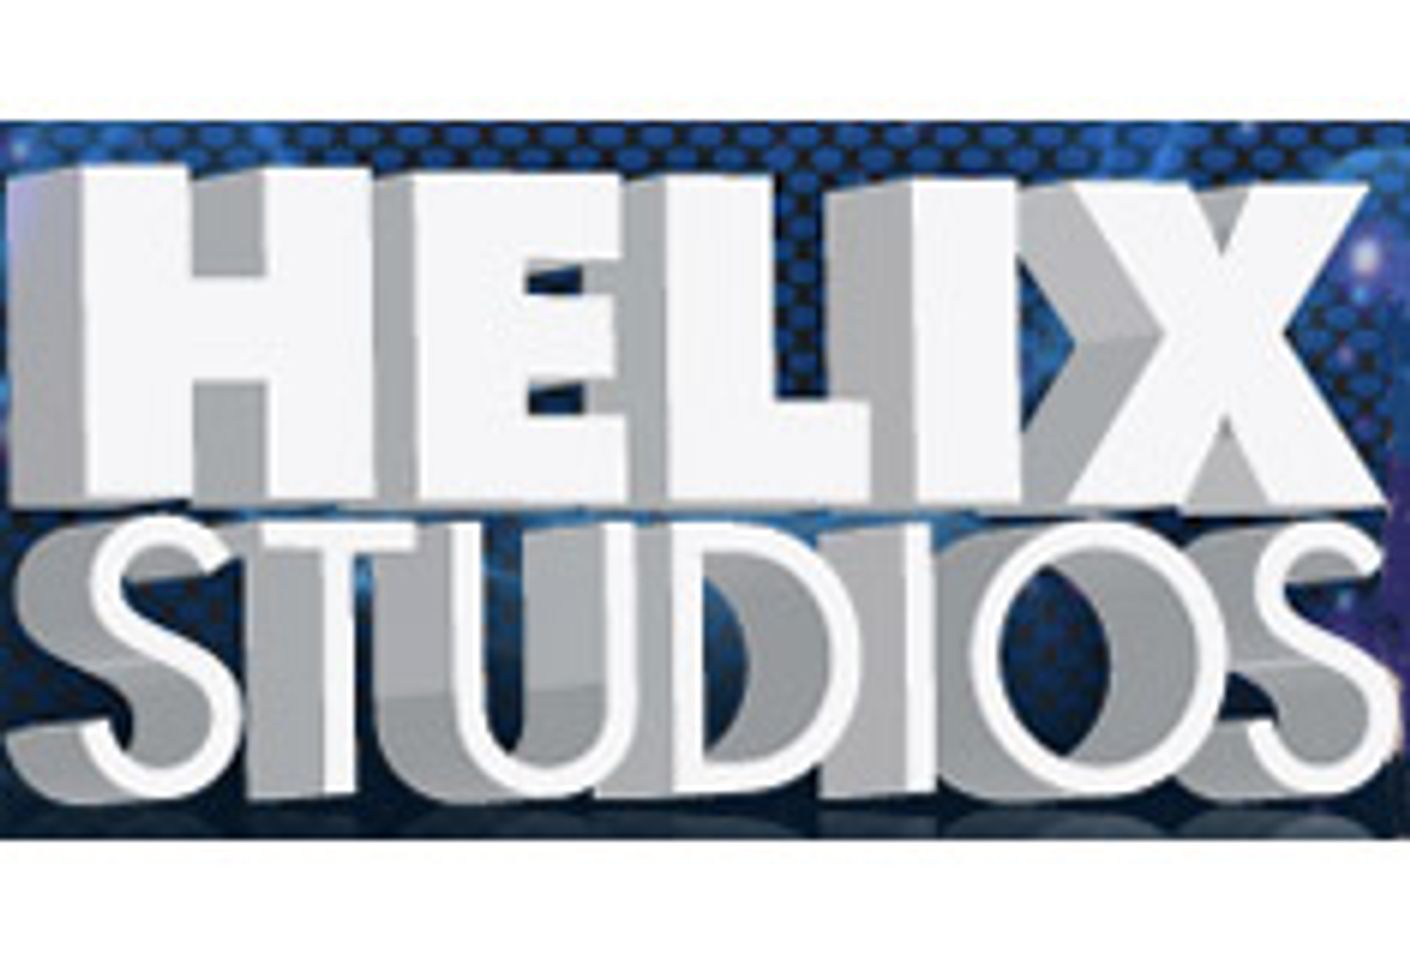 Helix Studios Launches Channel on Roku